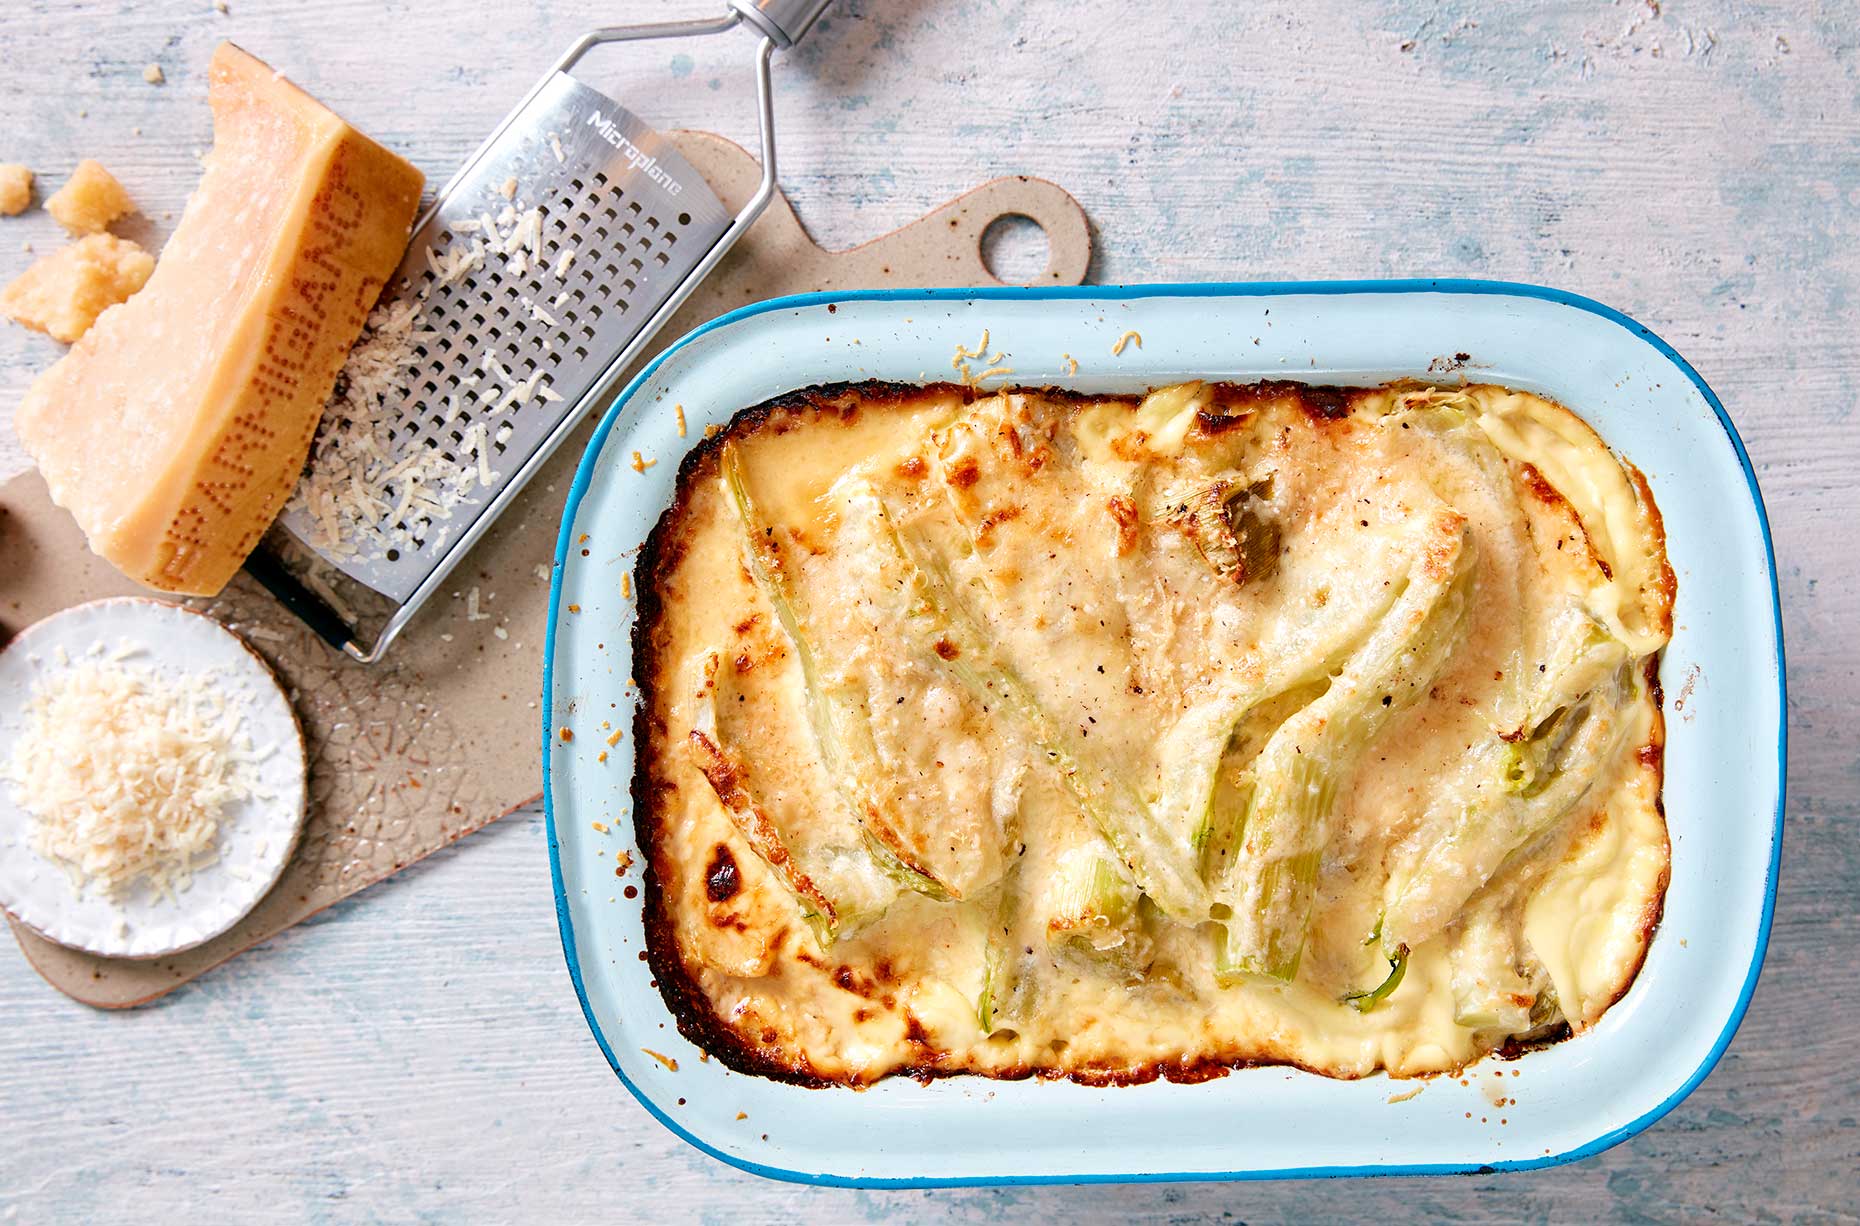 Fennel and Parmesan bake (Image: Photographed and styled at Steve Lee Studios, courtesy of Parmigiano Reggiano)